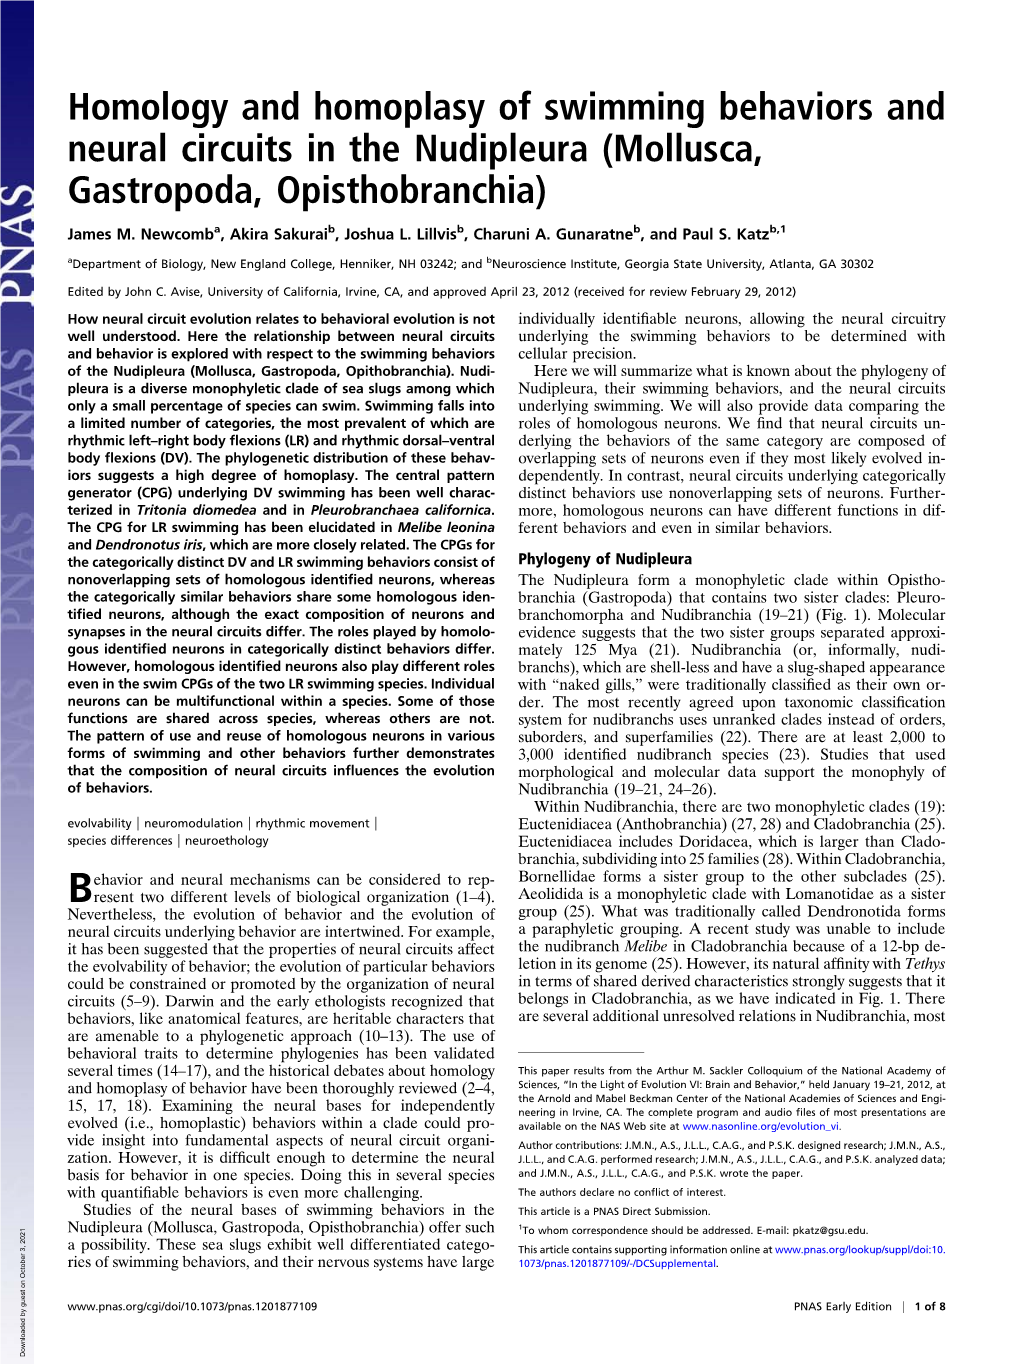 Homology and Homoplasy of Swimming Behaviors and Neural Circuits in the Nudipleura (Mollusca, Gastropoda, Opisthobranchia)